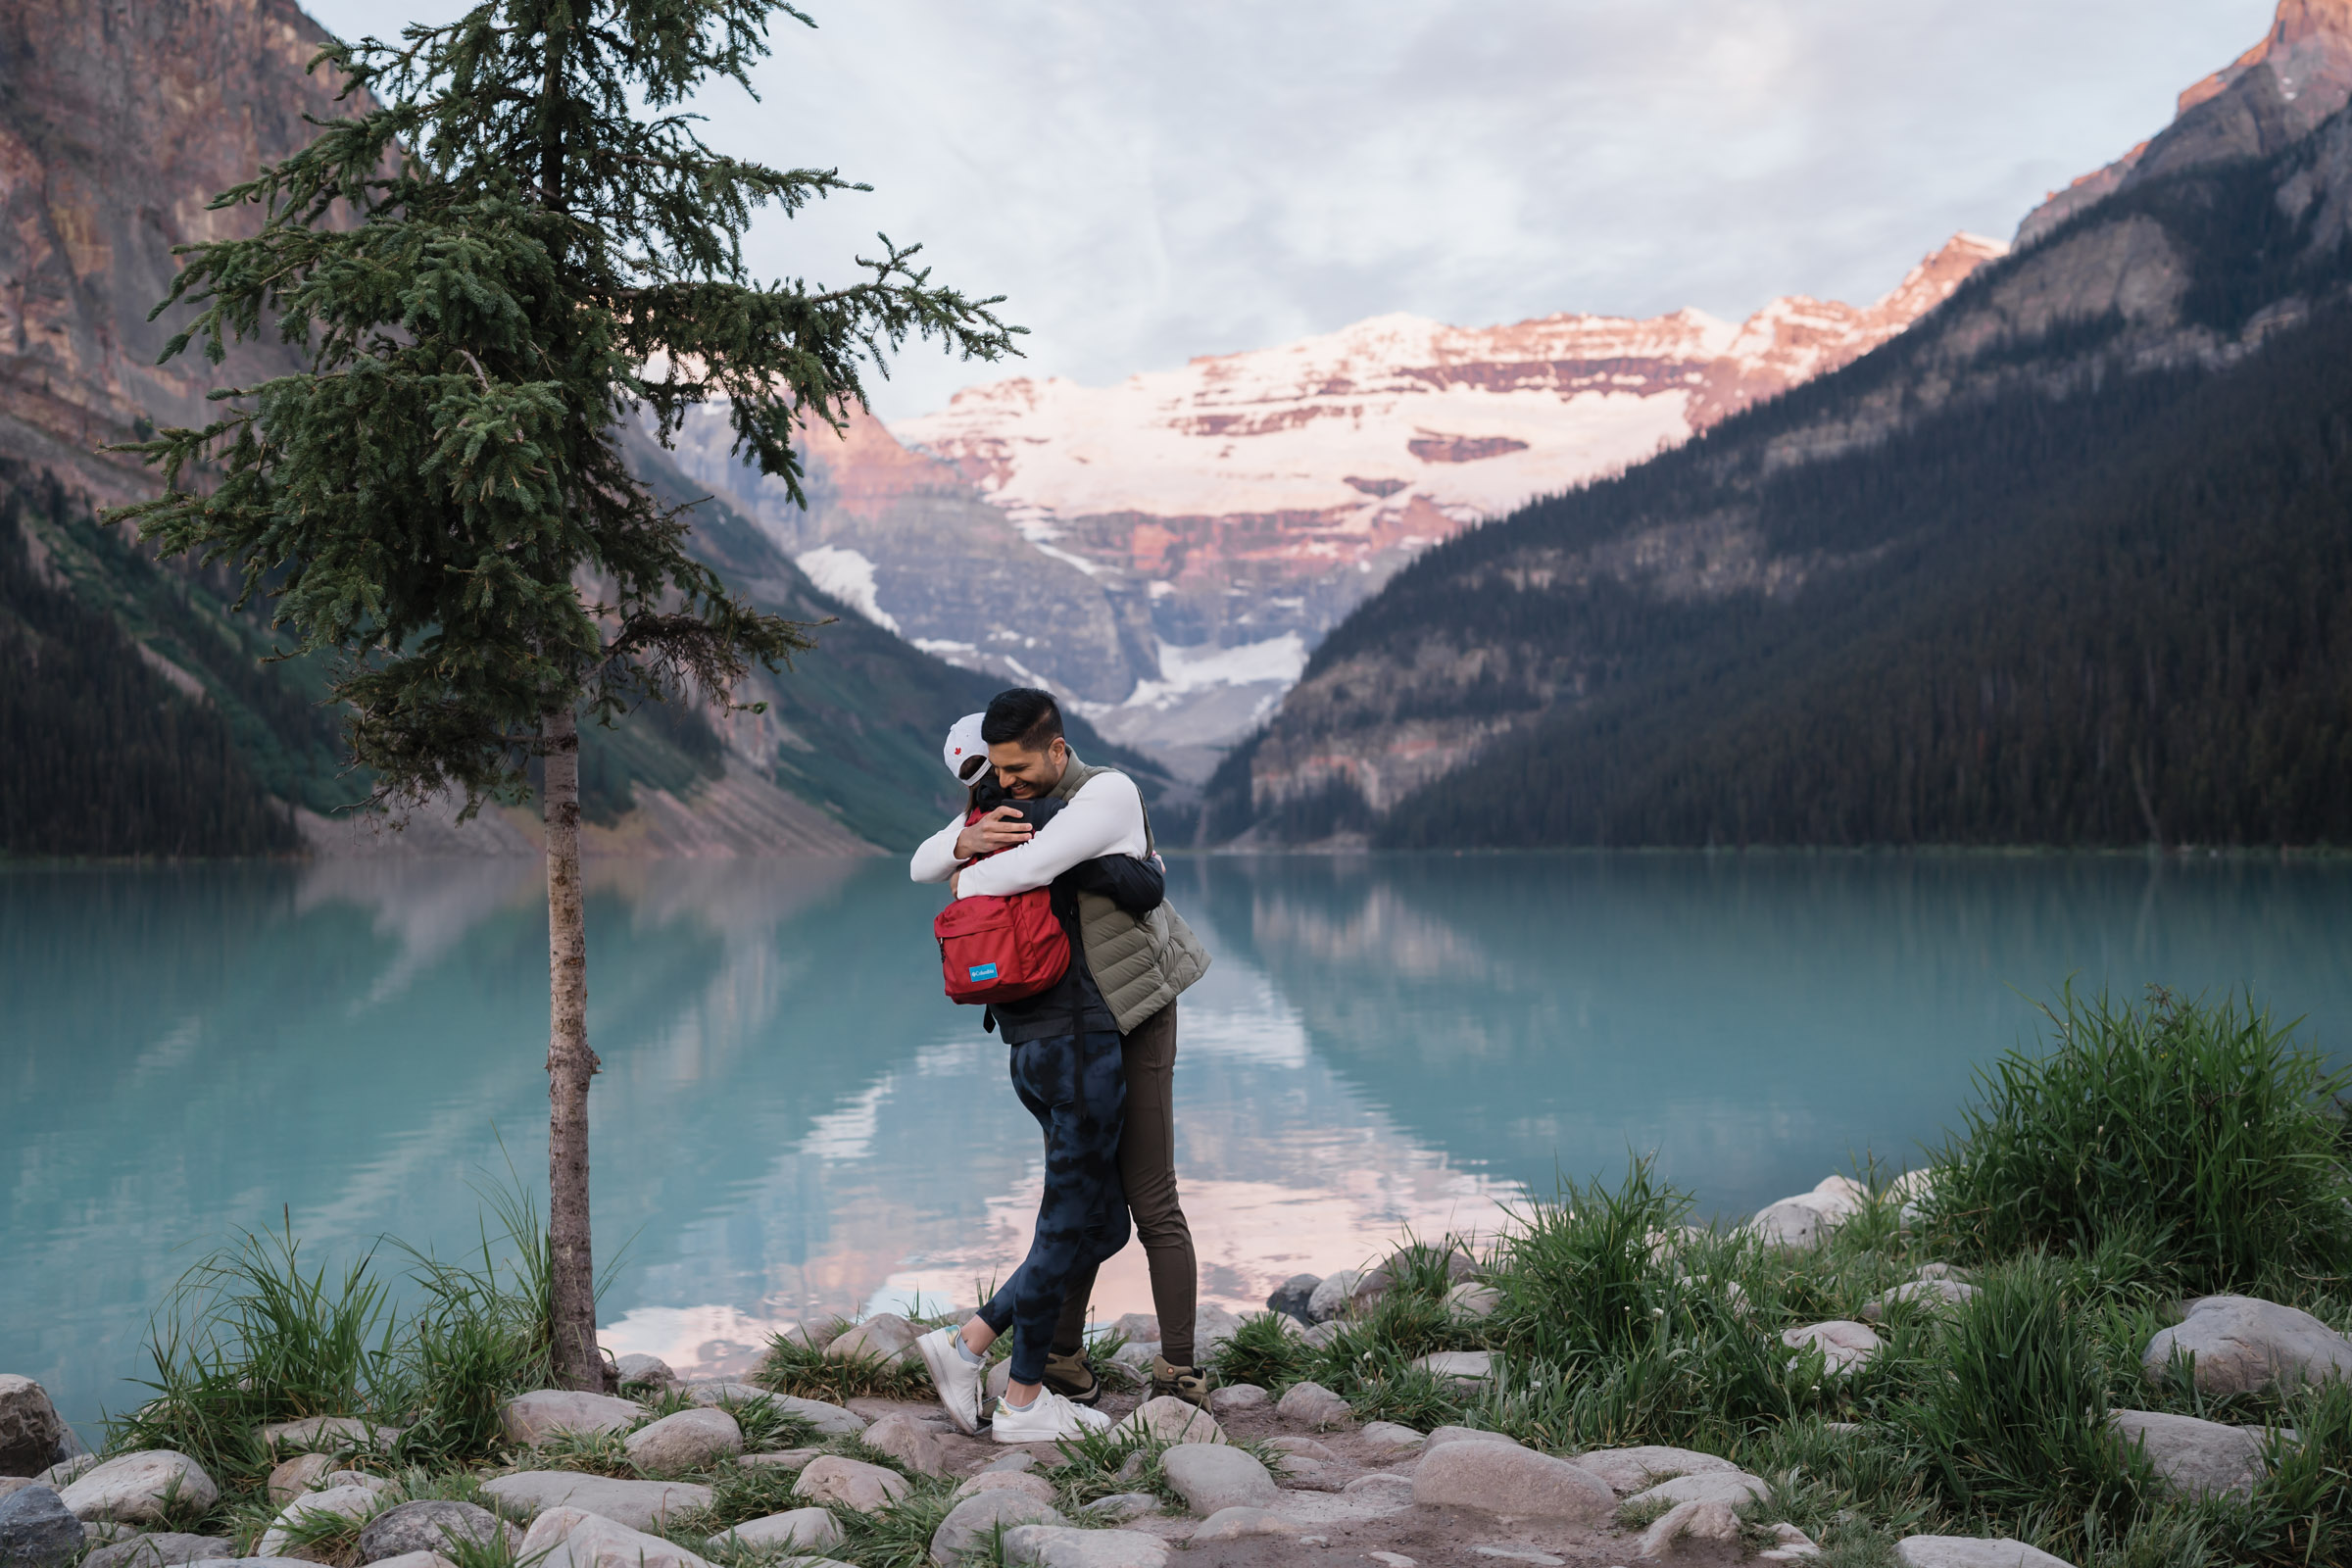 Man and women embrace after a proposal in front of Lake Louise at sunrise.